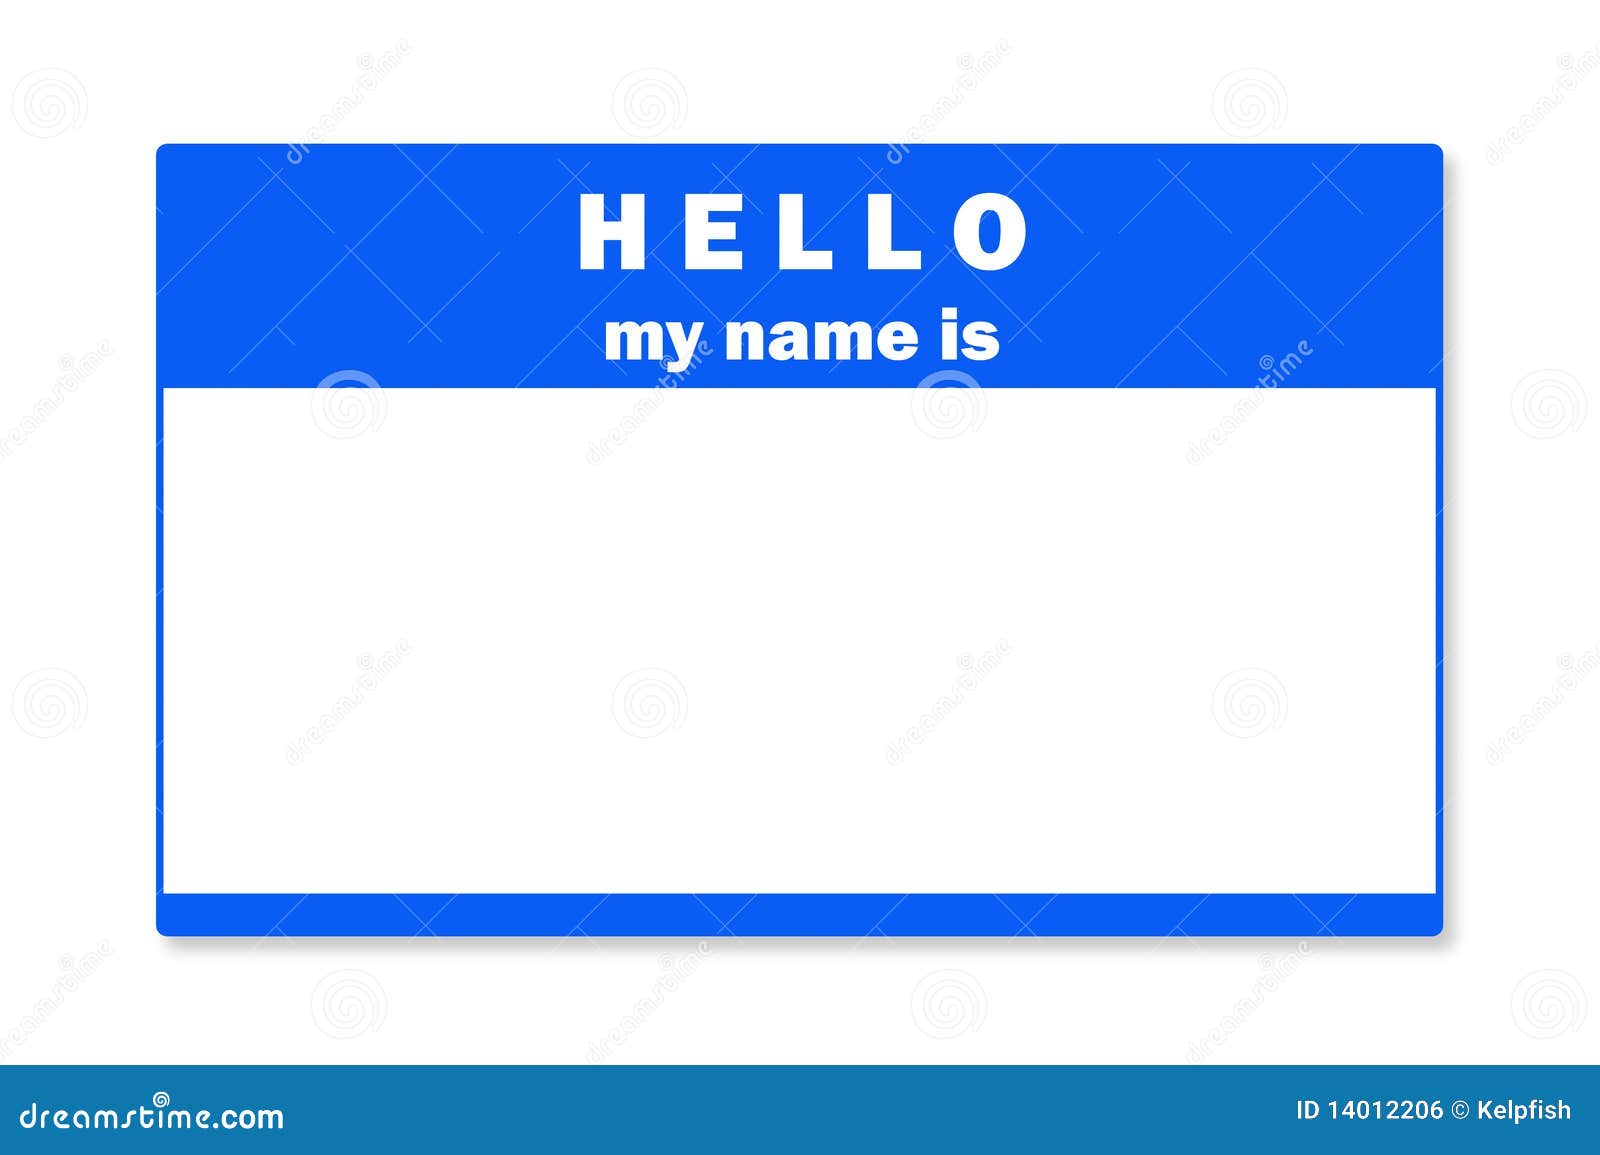 blank name tag with clipping path for use as a design element.